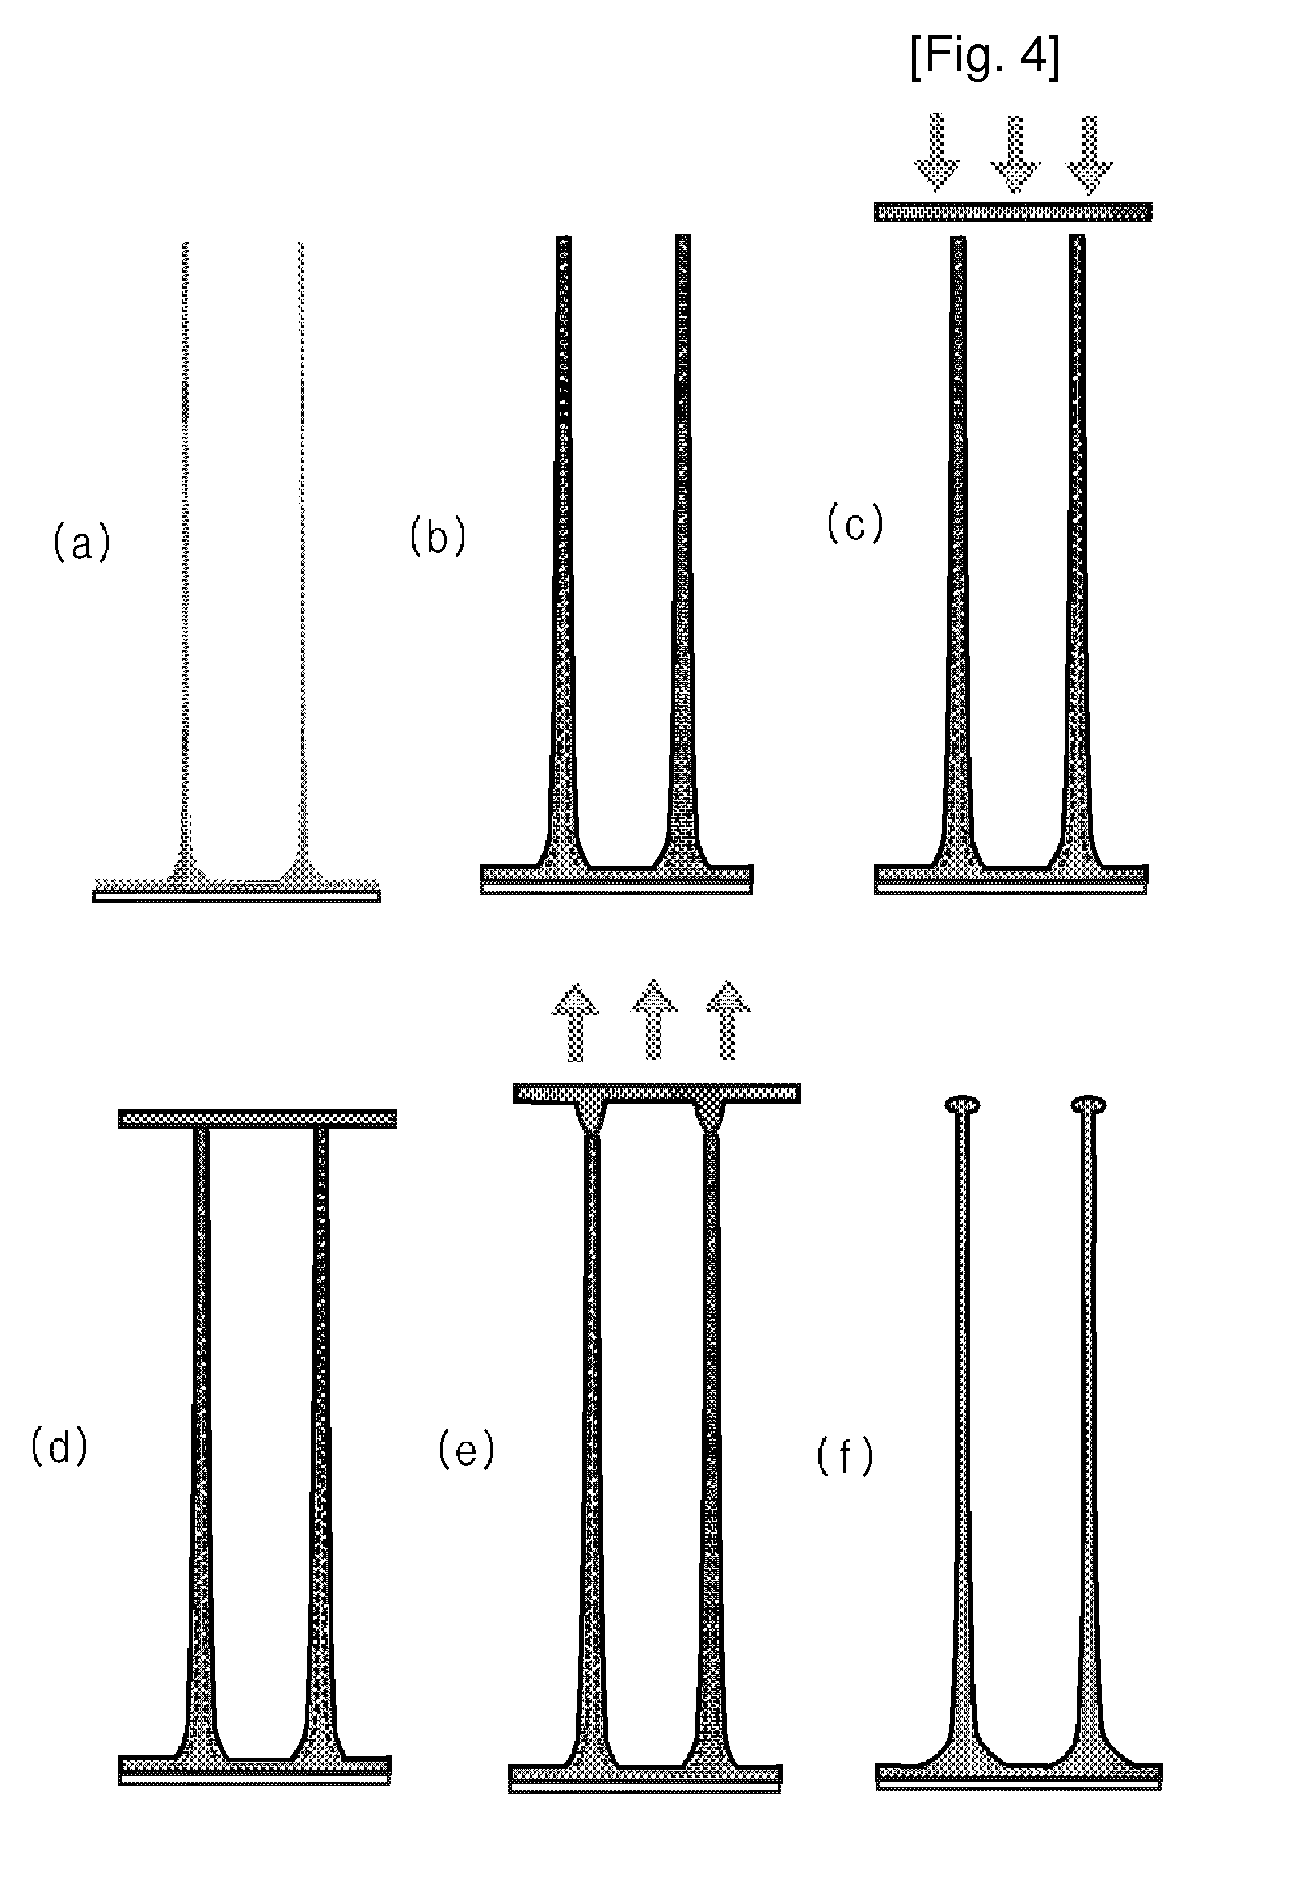 Method for preparing a hollow microneedle